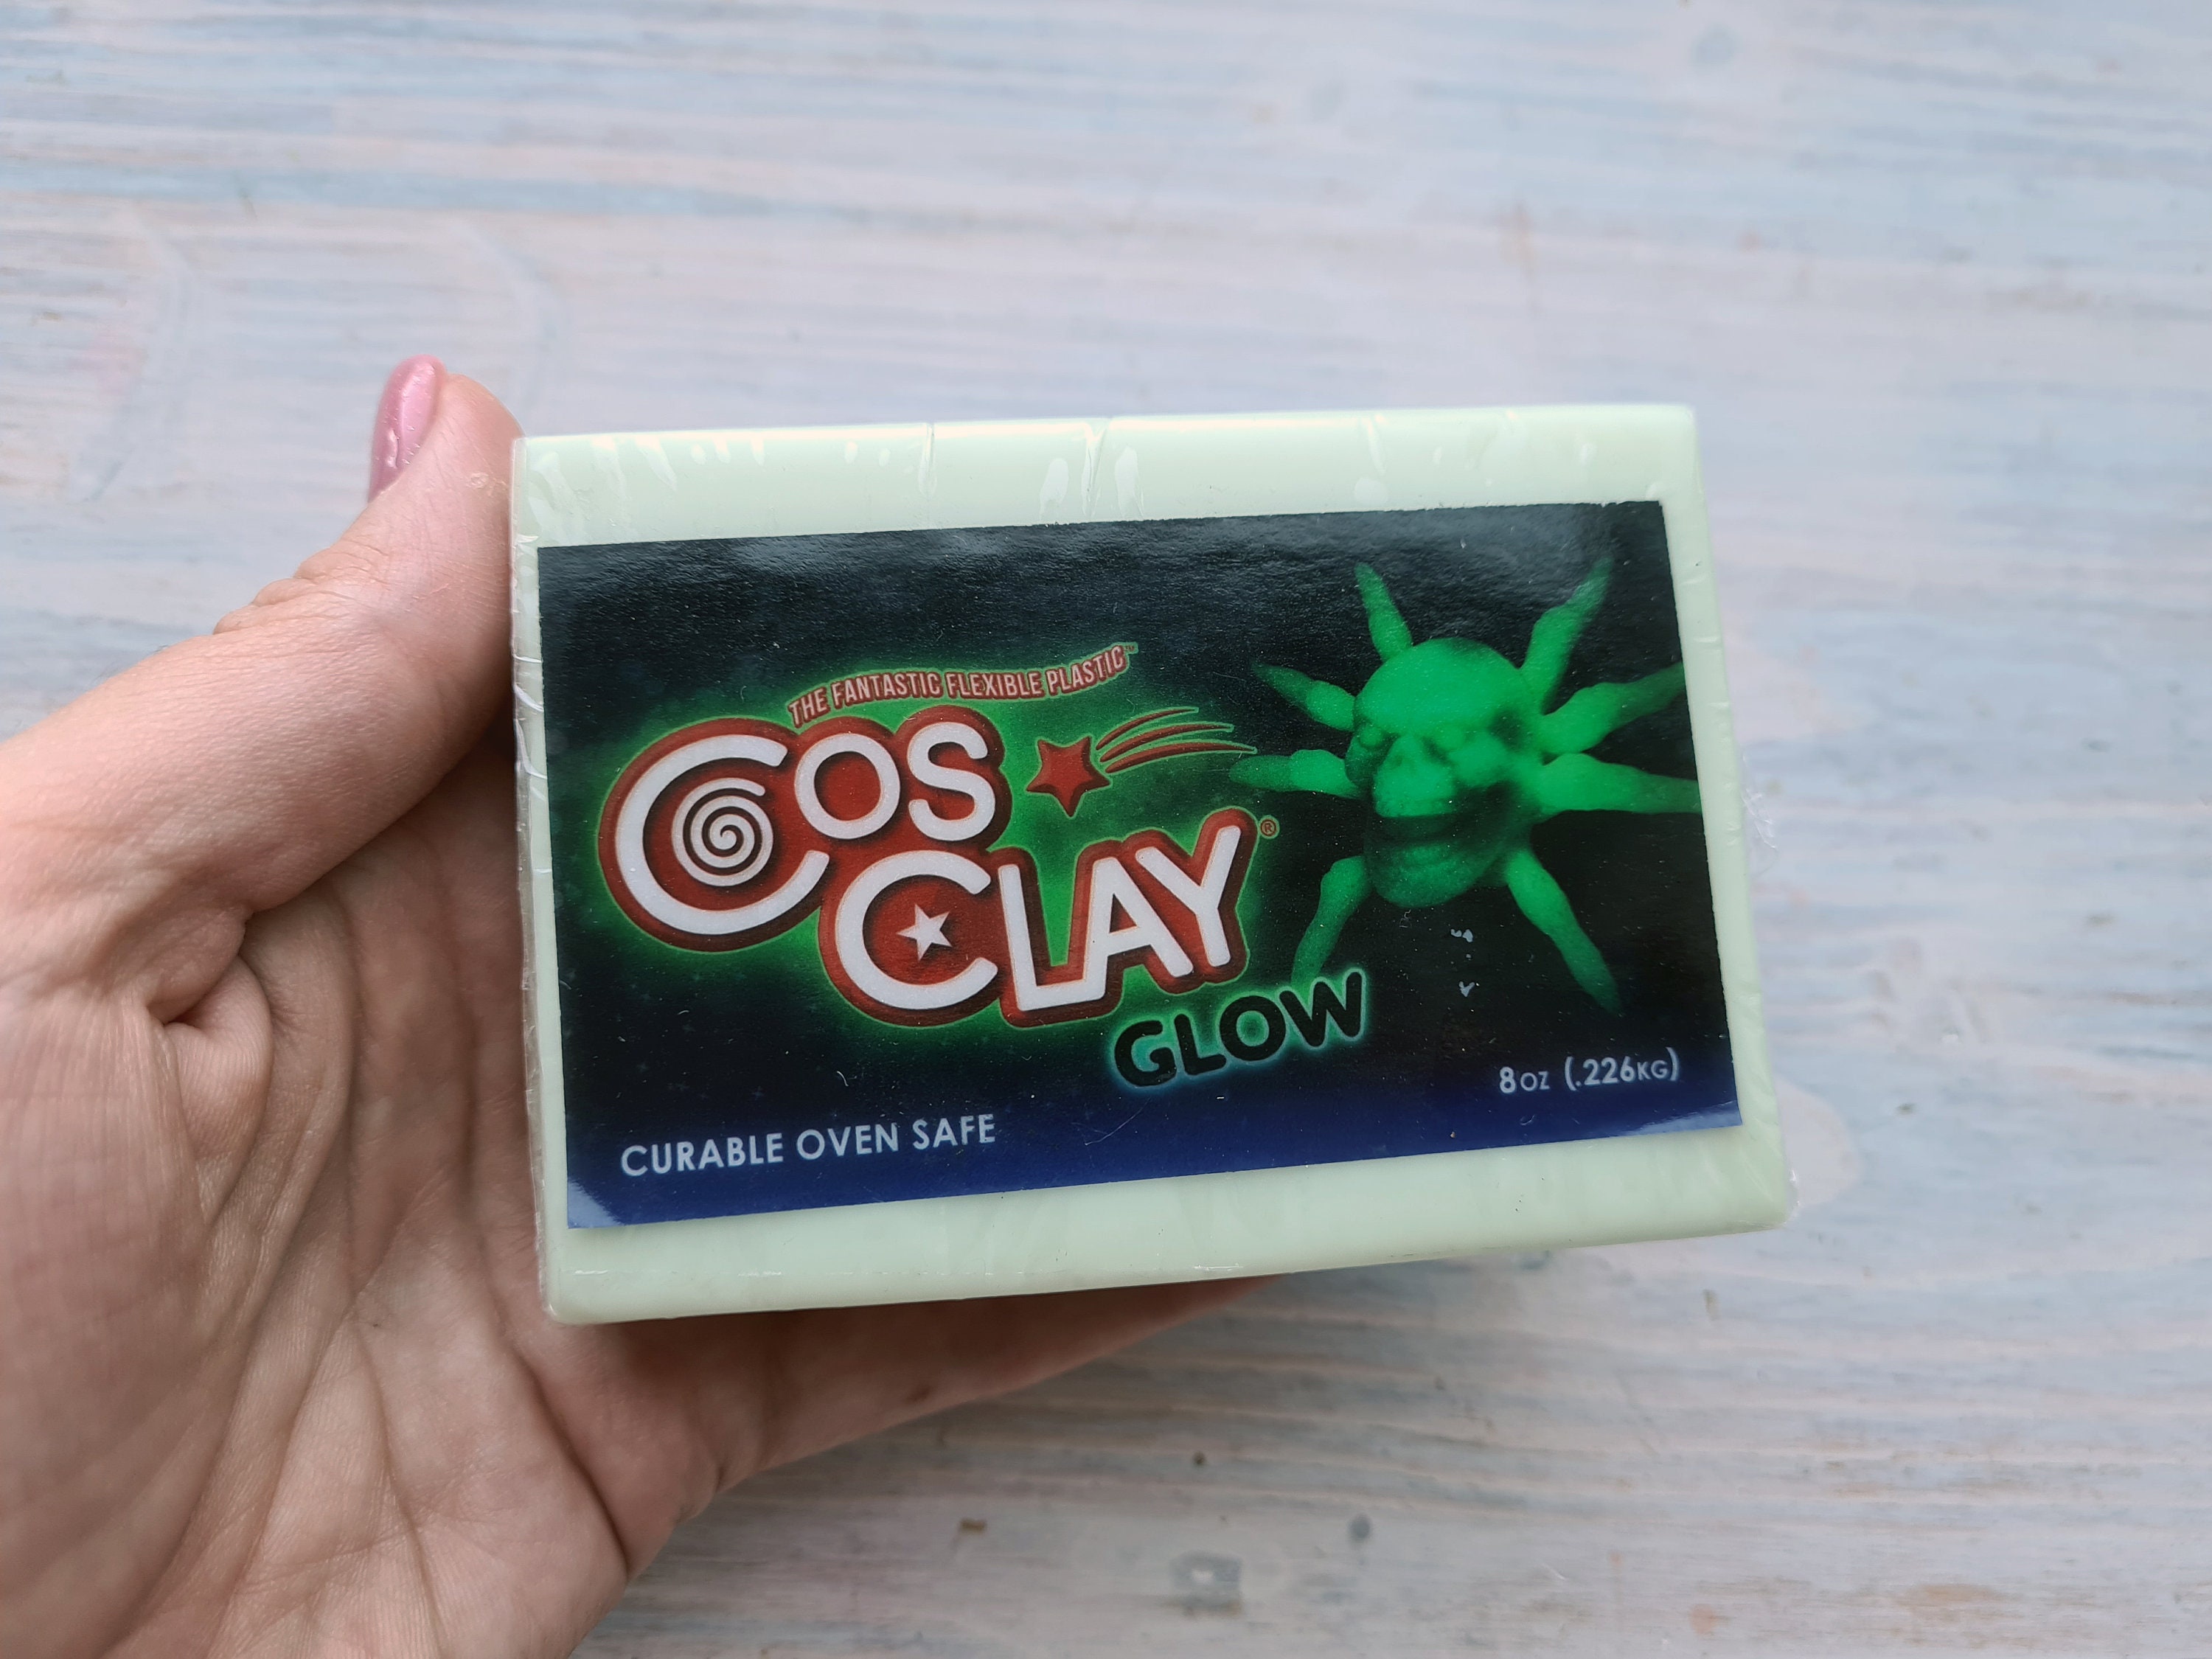 Cosclay ELEMENTS Glow, 260 G, 0.57 Lb, Modelling Clay for Making